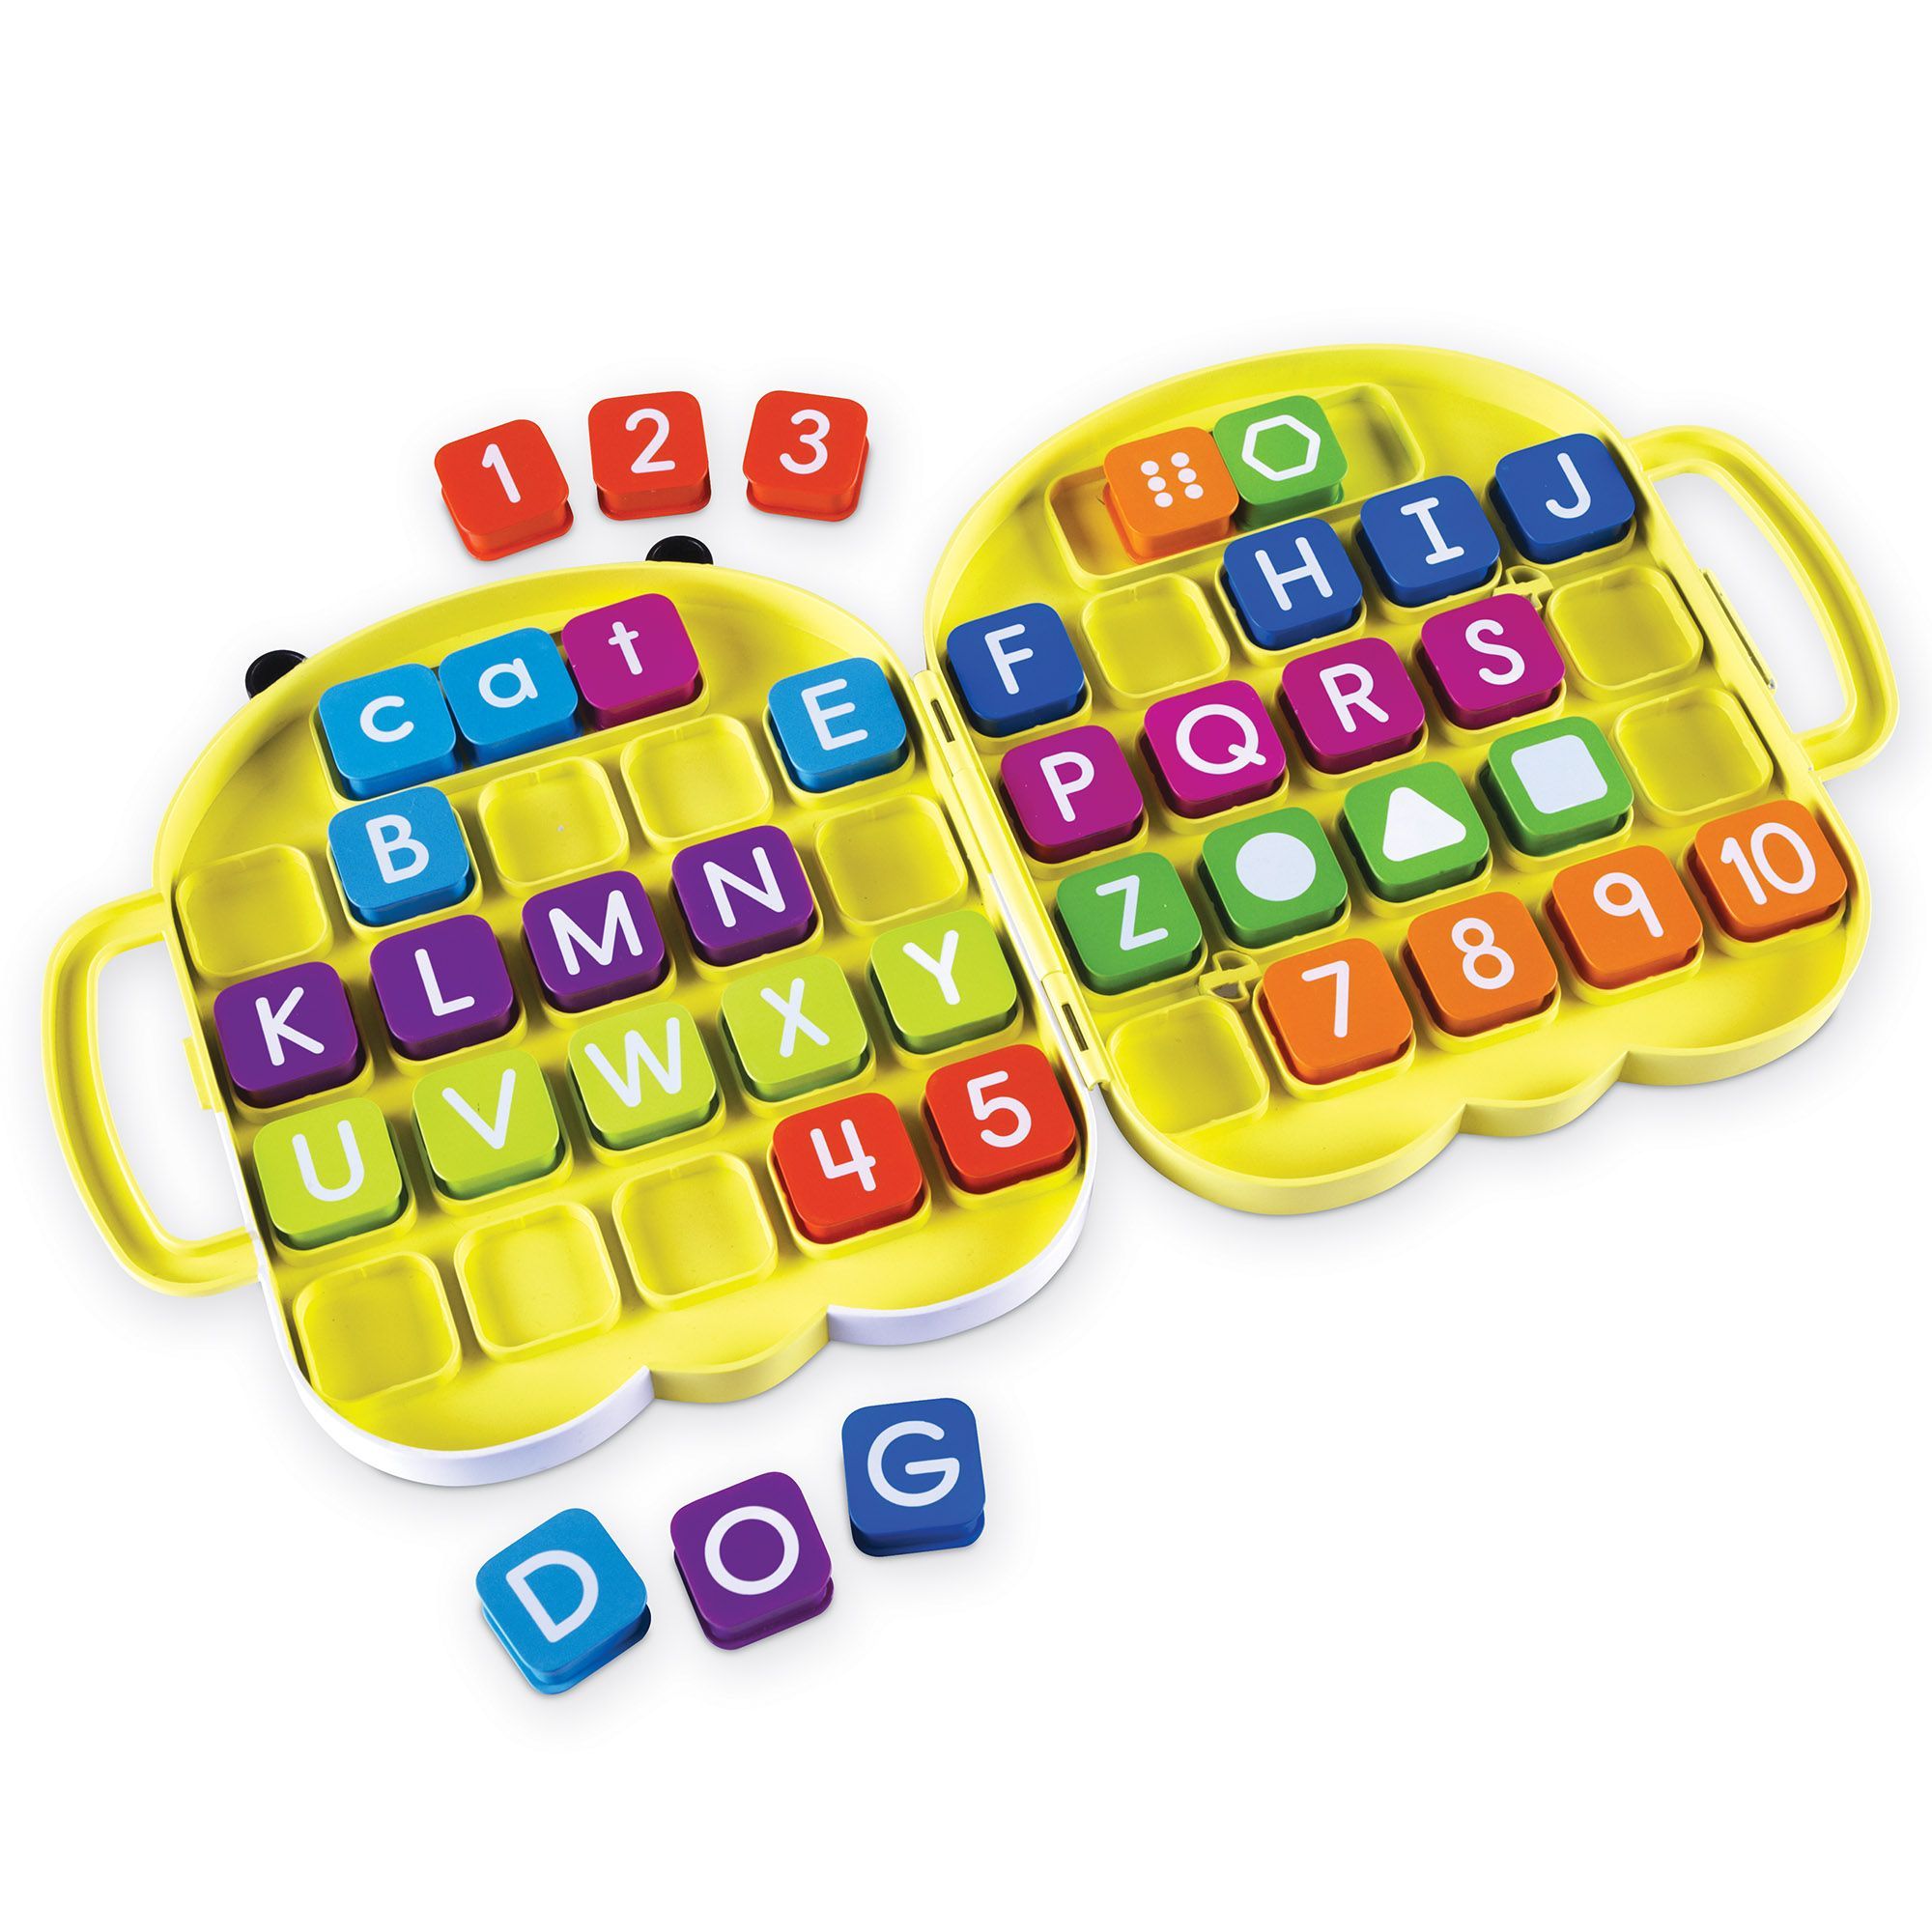 Alphabee toy for 2 year old - learning resources toys - early learning toys at The Toy Room